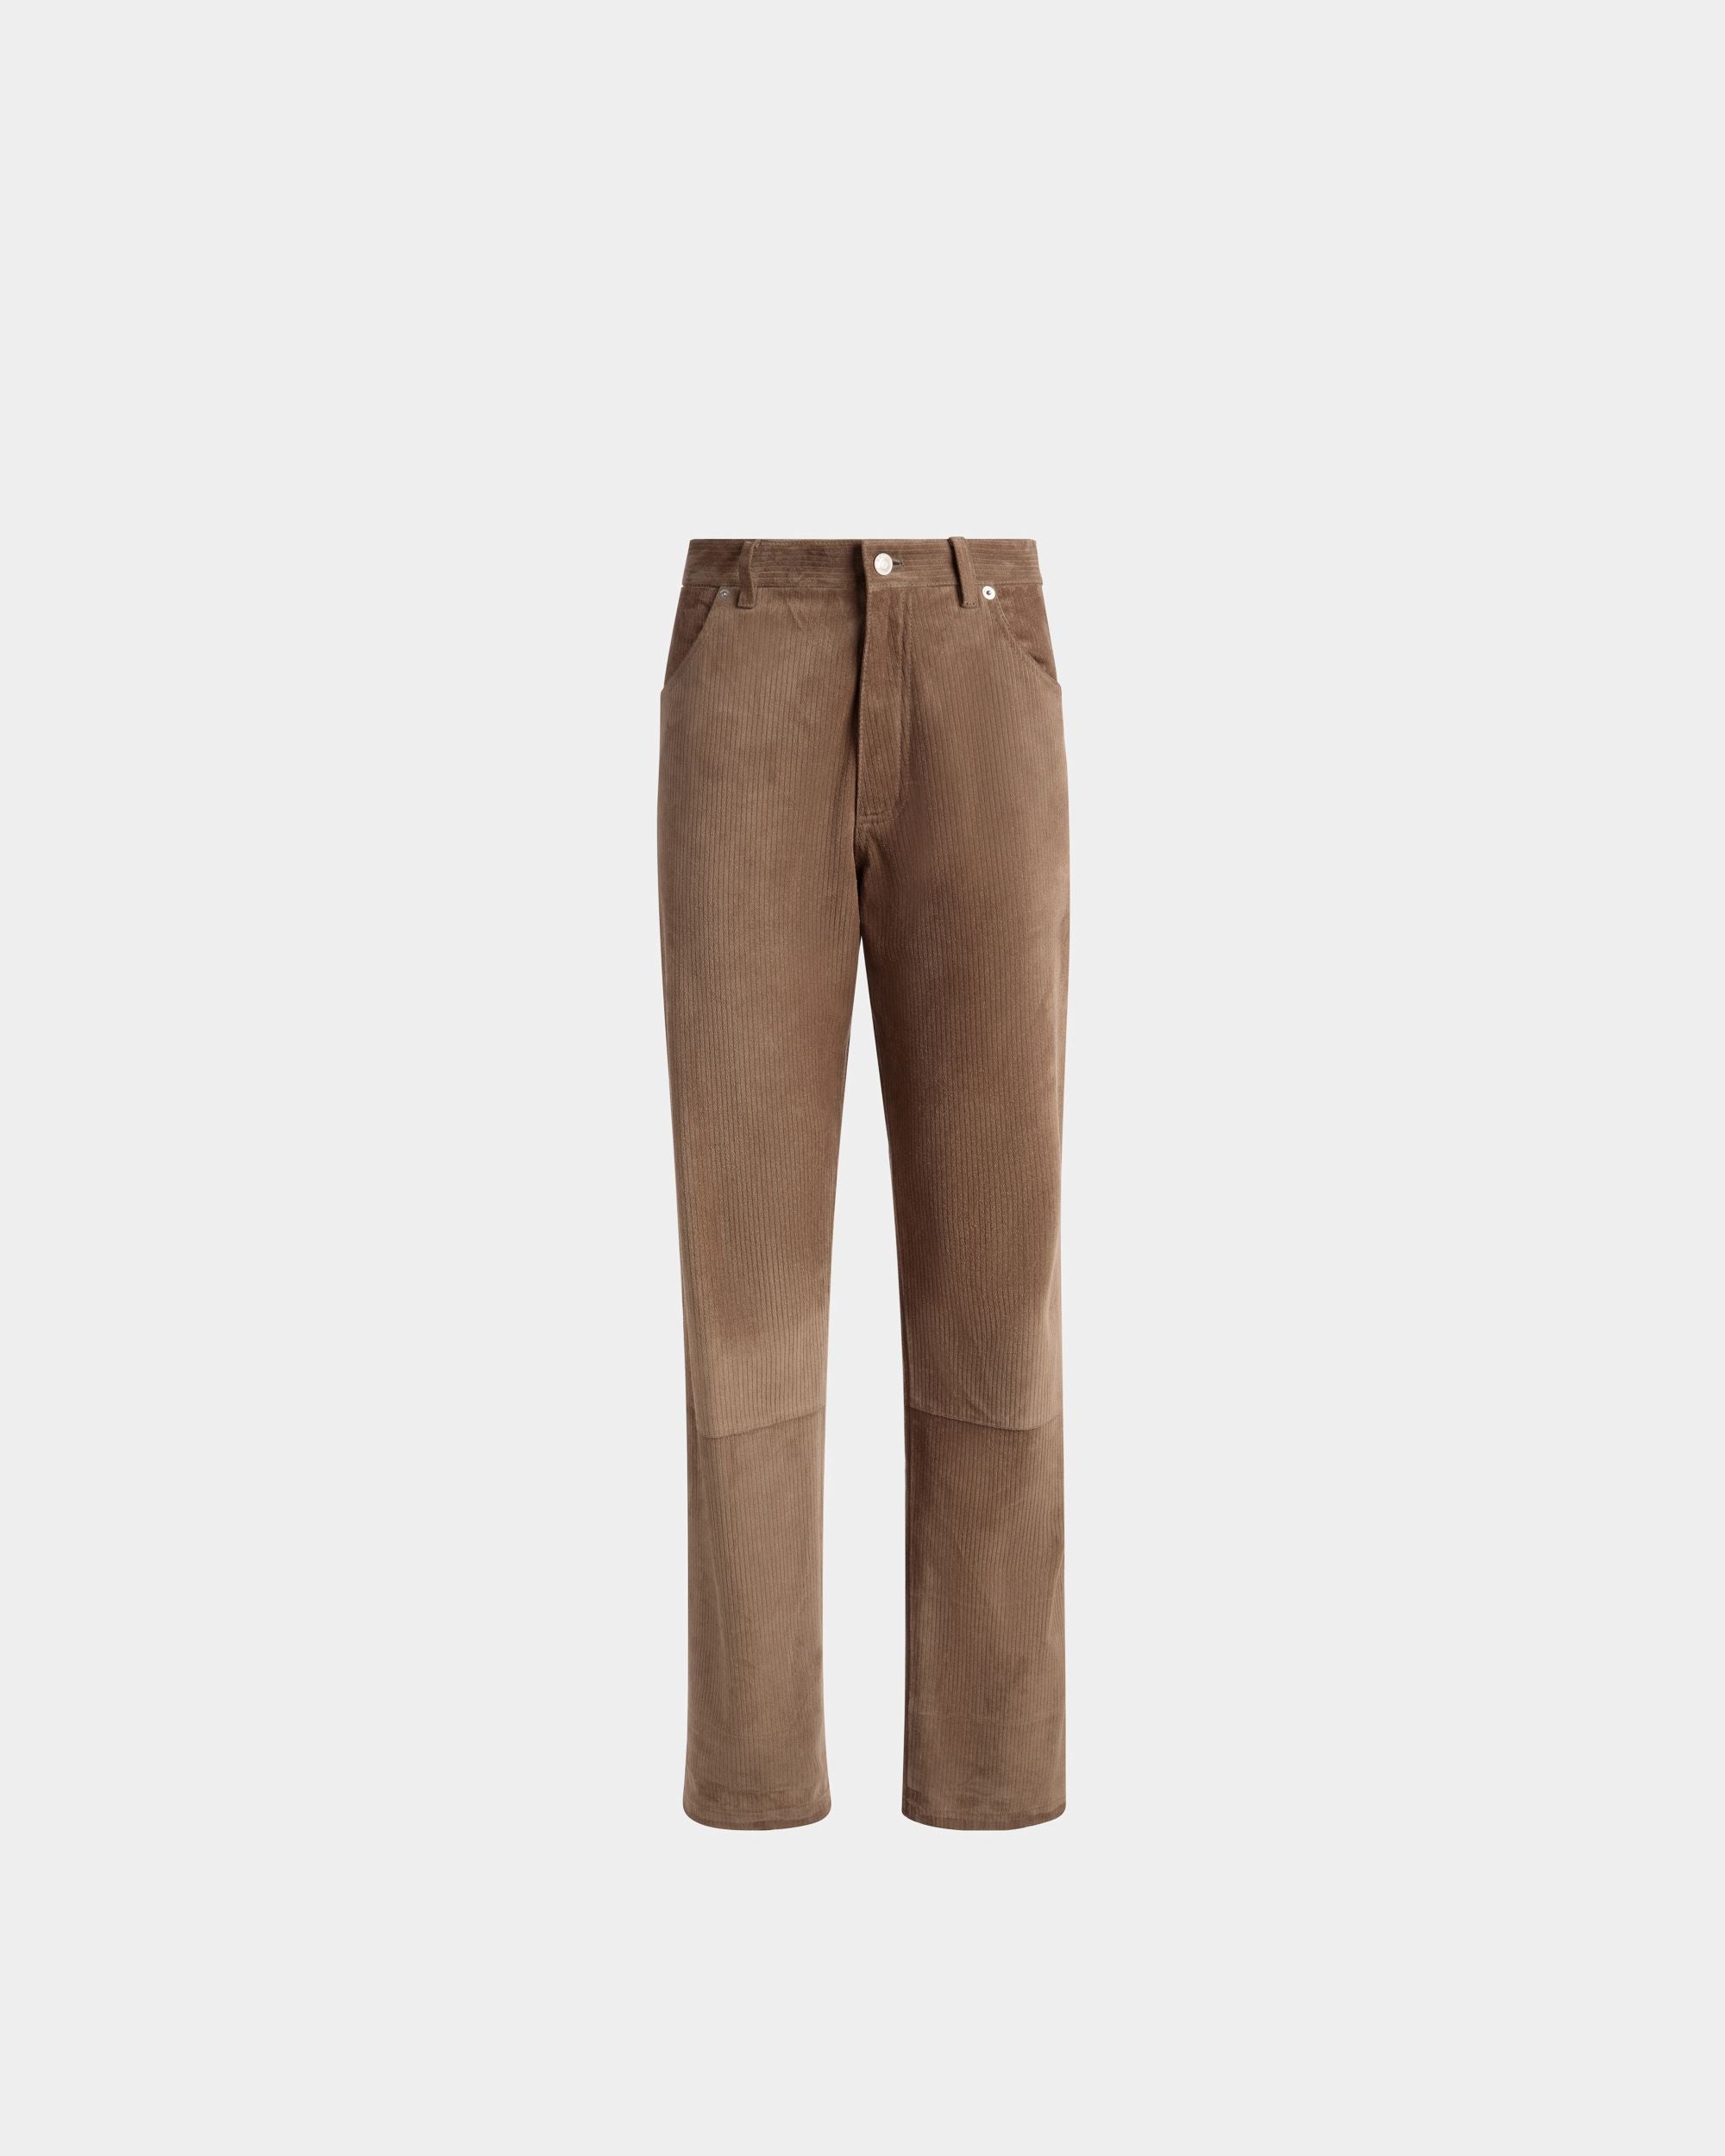 Straight Trousers | Men's Trousers | Sepia Leather | Bally | Still Life Front